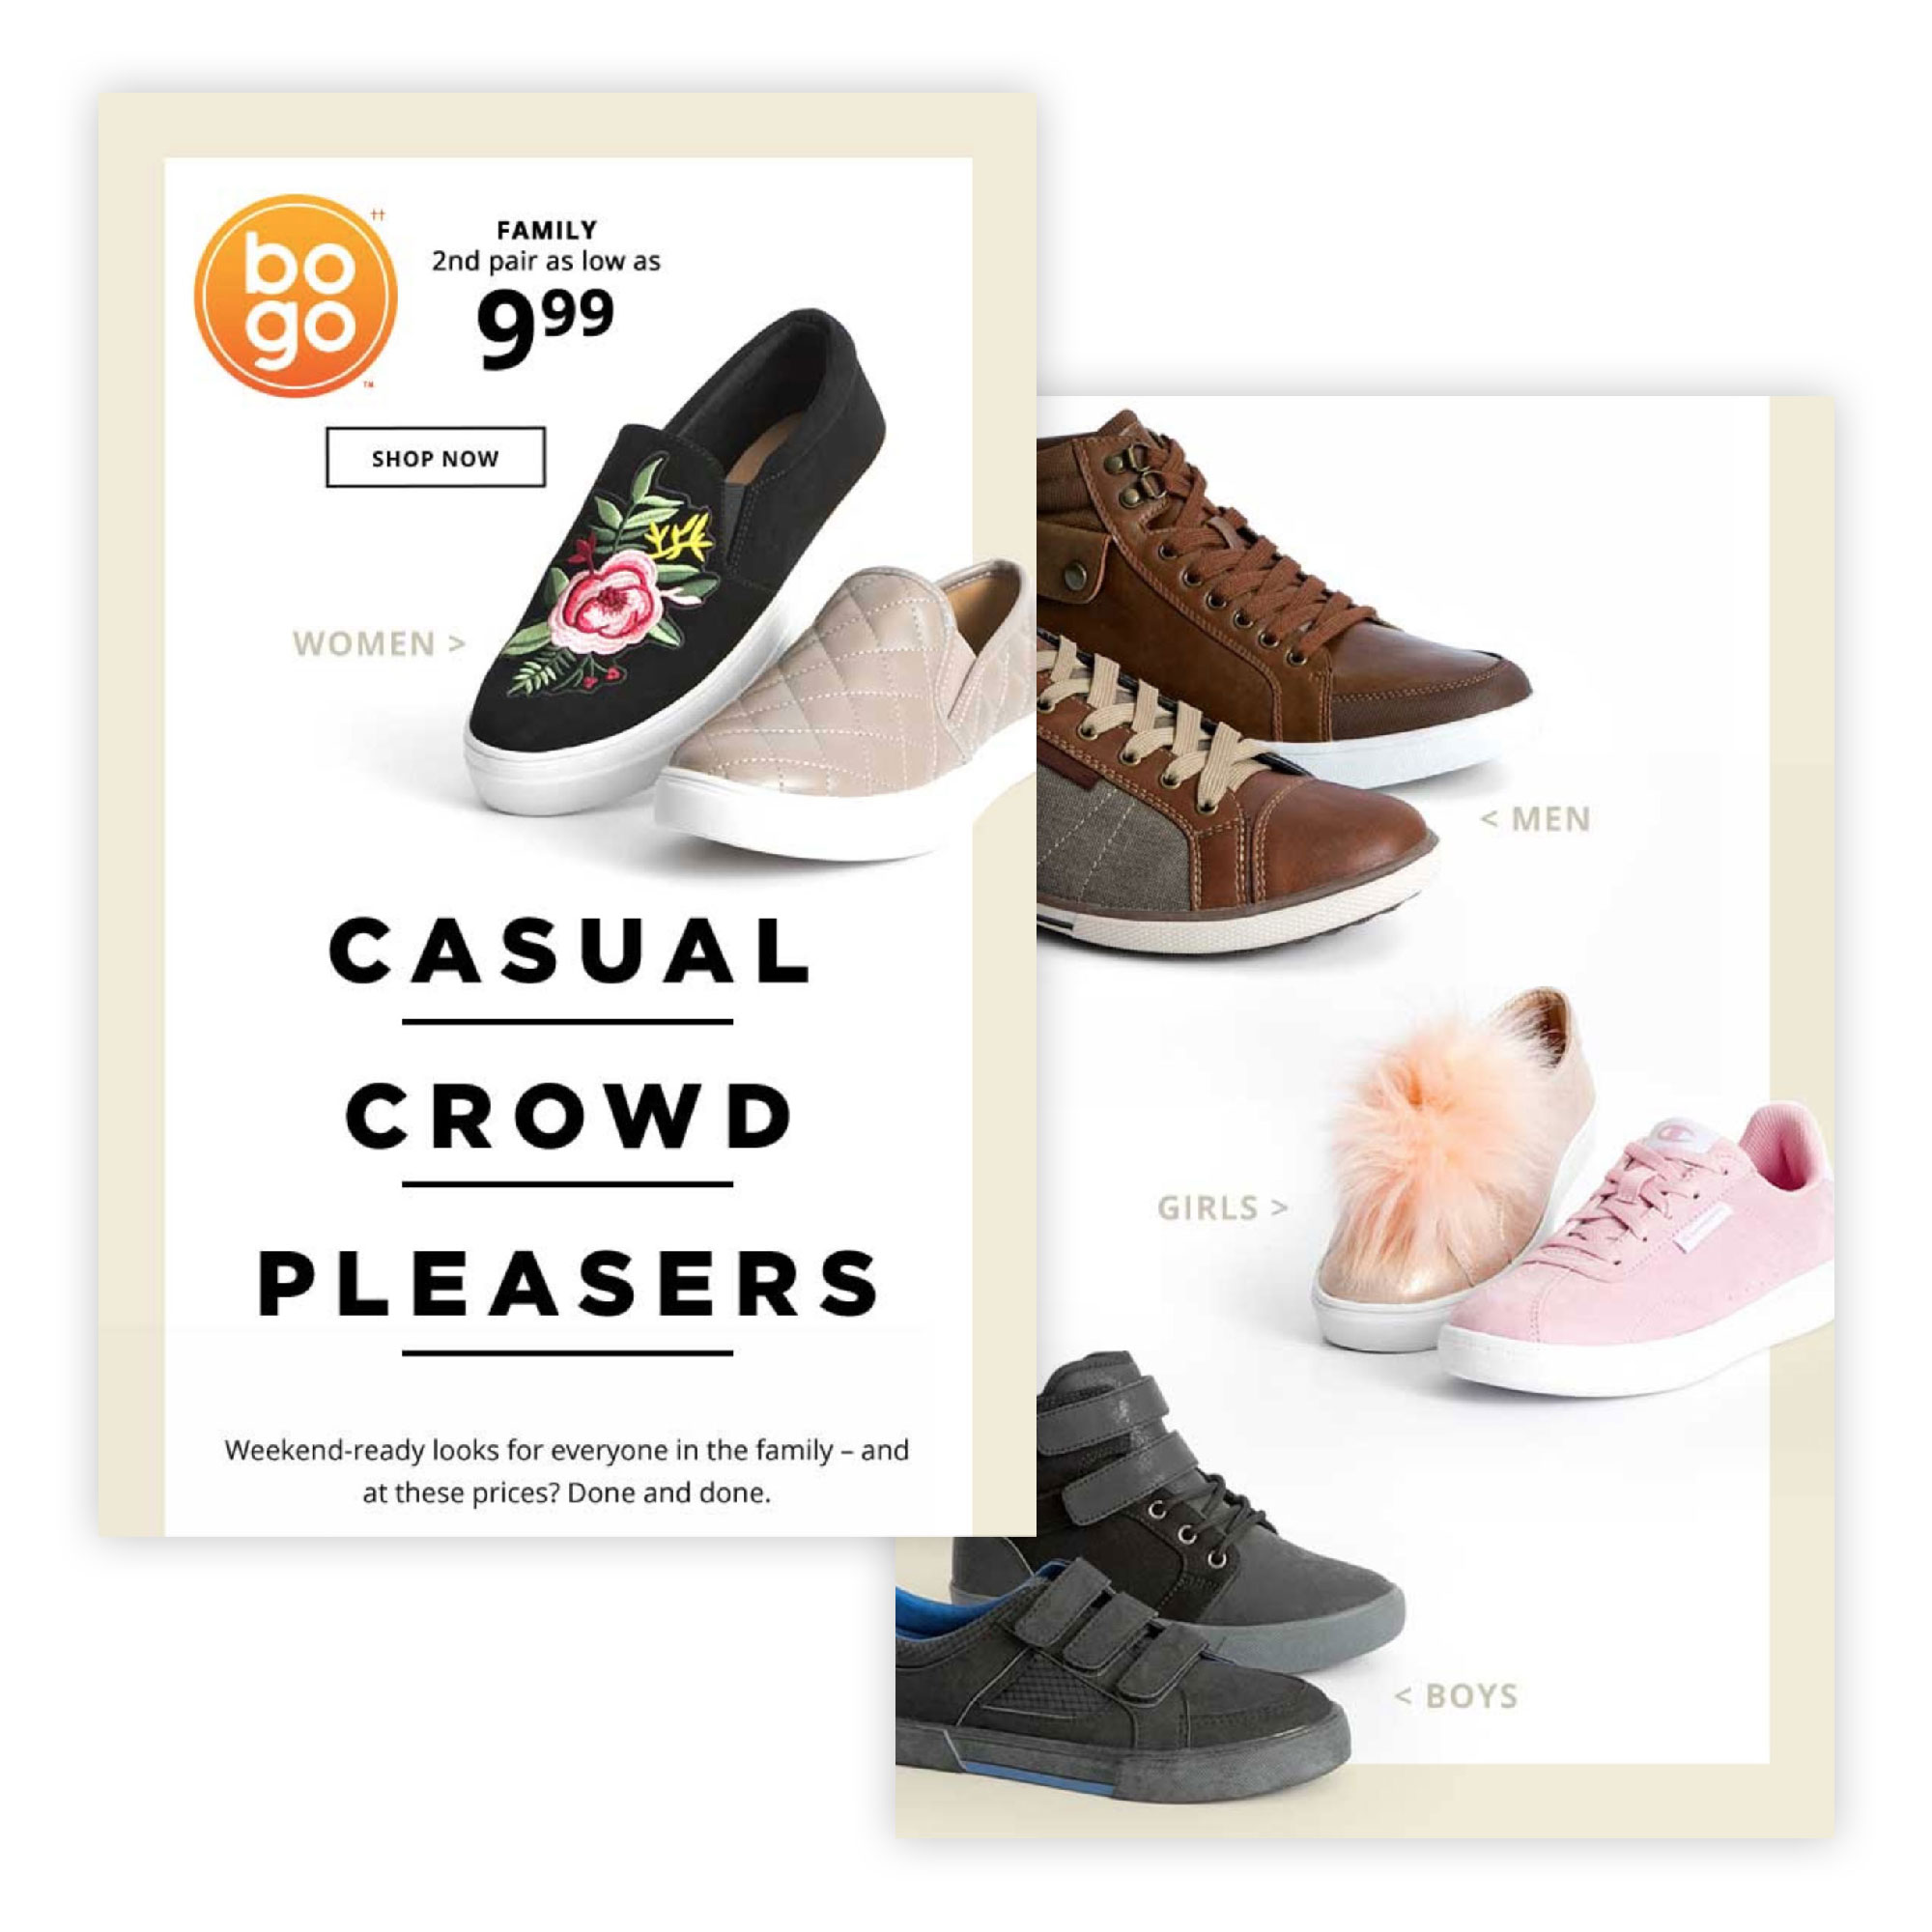 Payless-Email-1.jpg